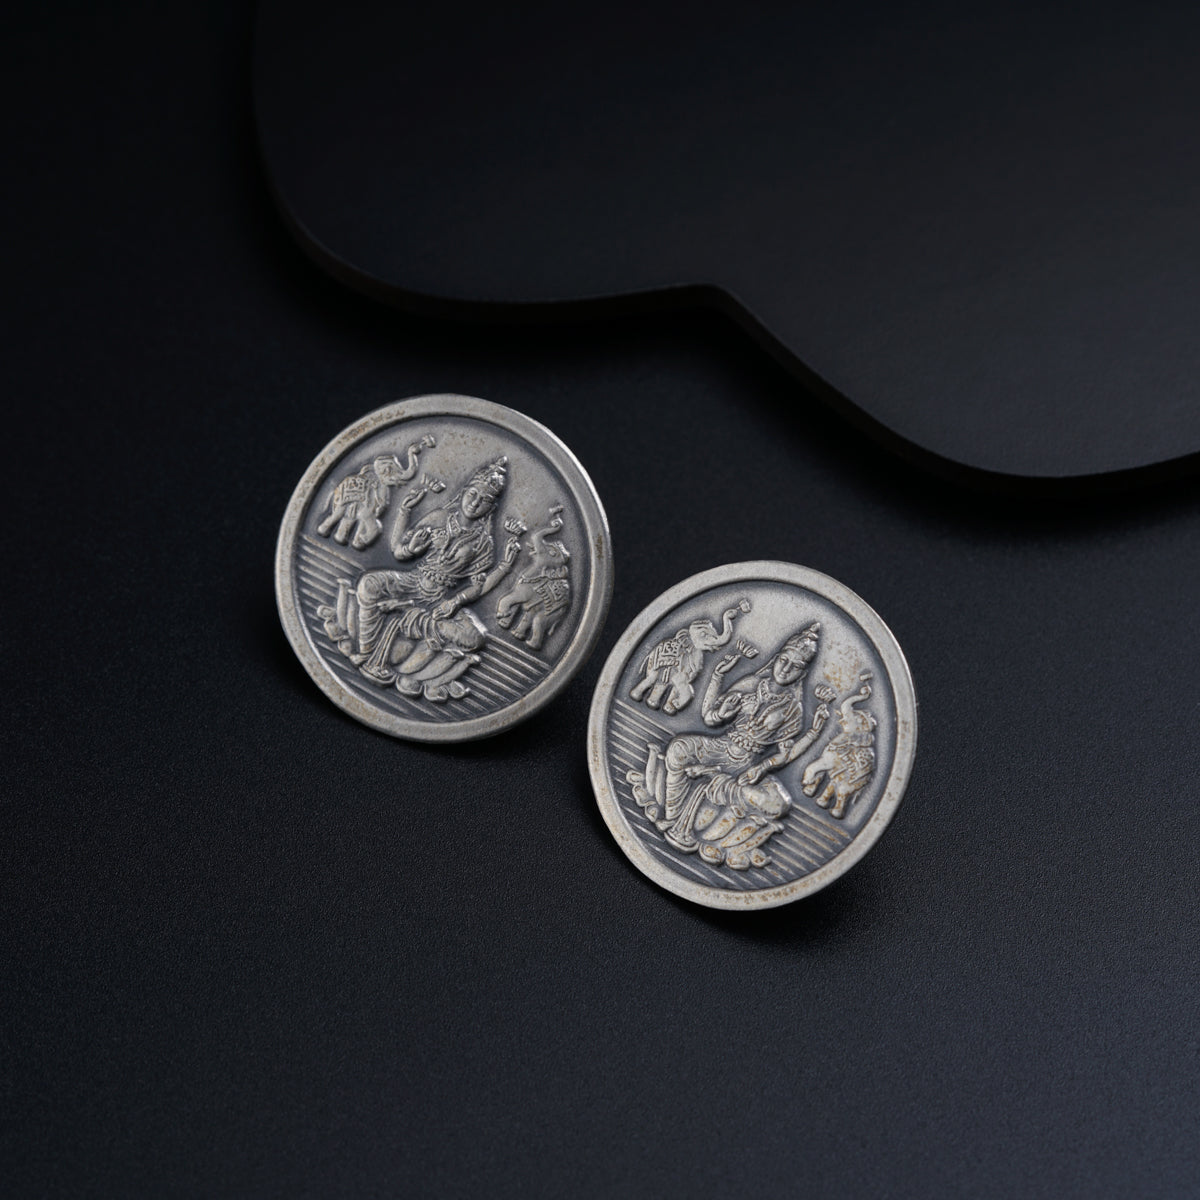 a pair of silver coin sitting on top of a black surface